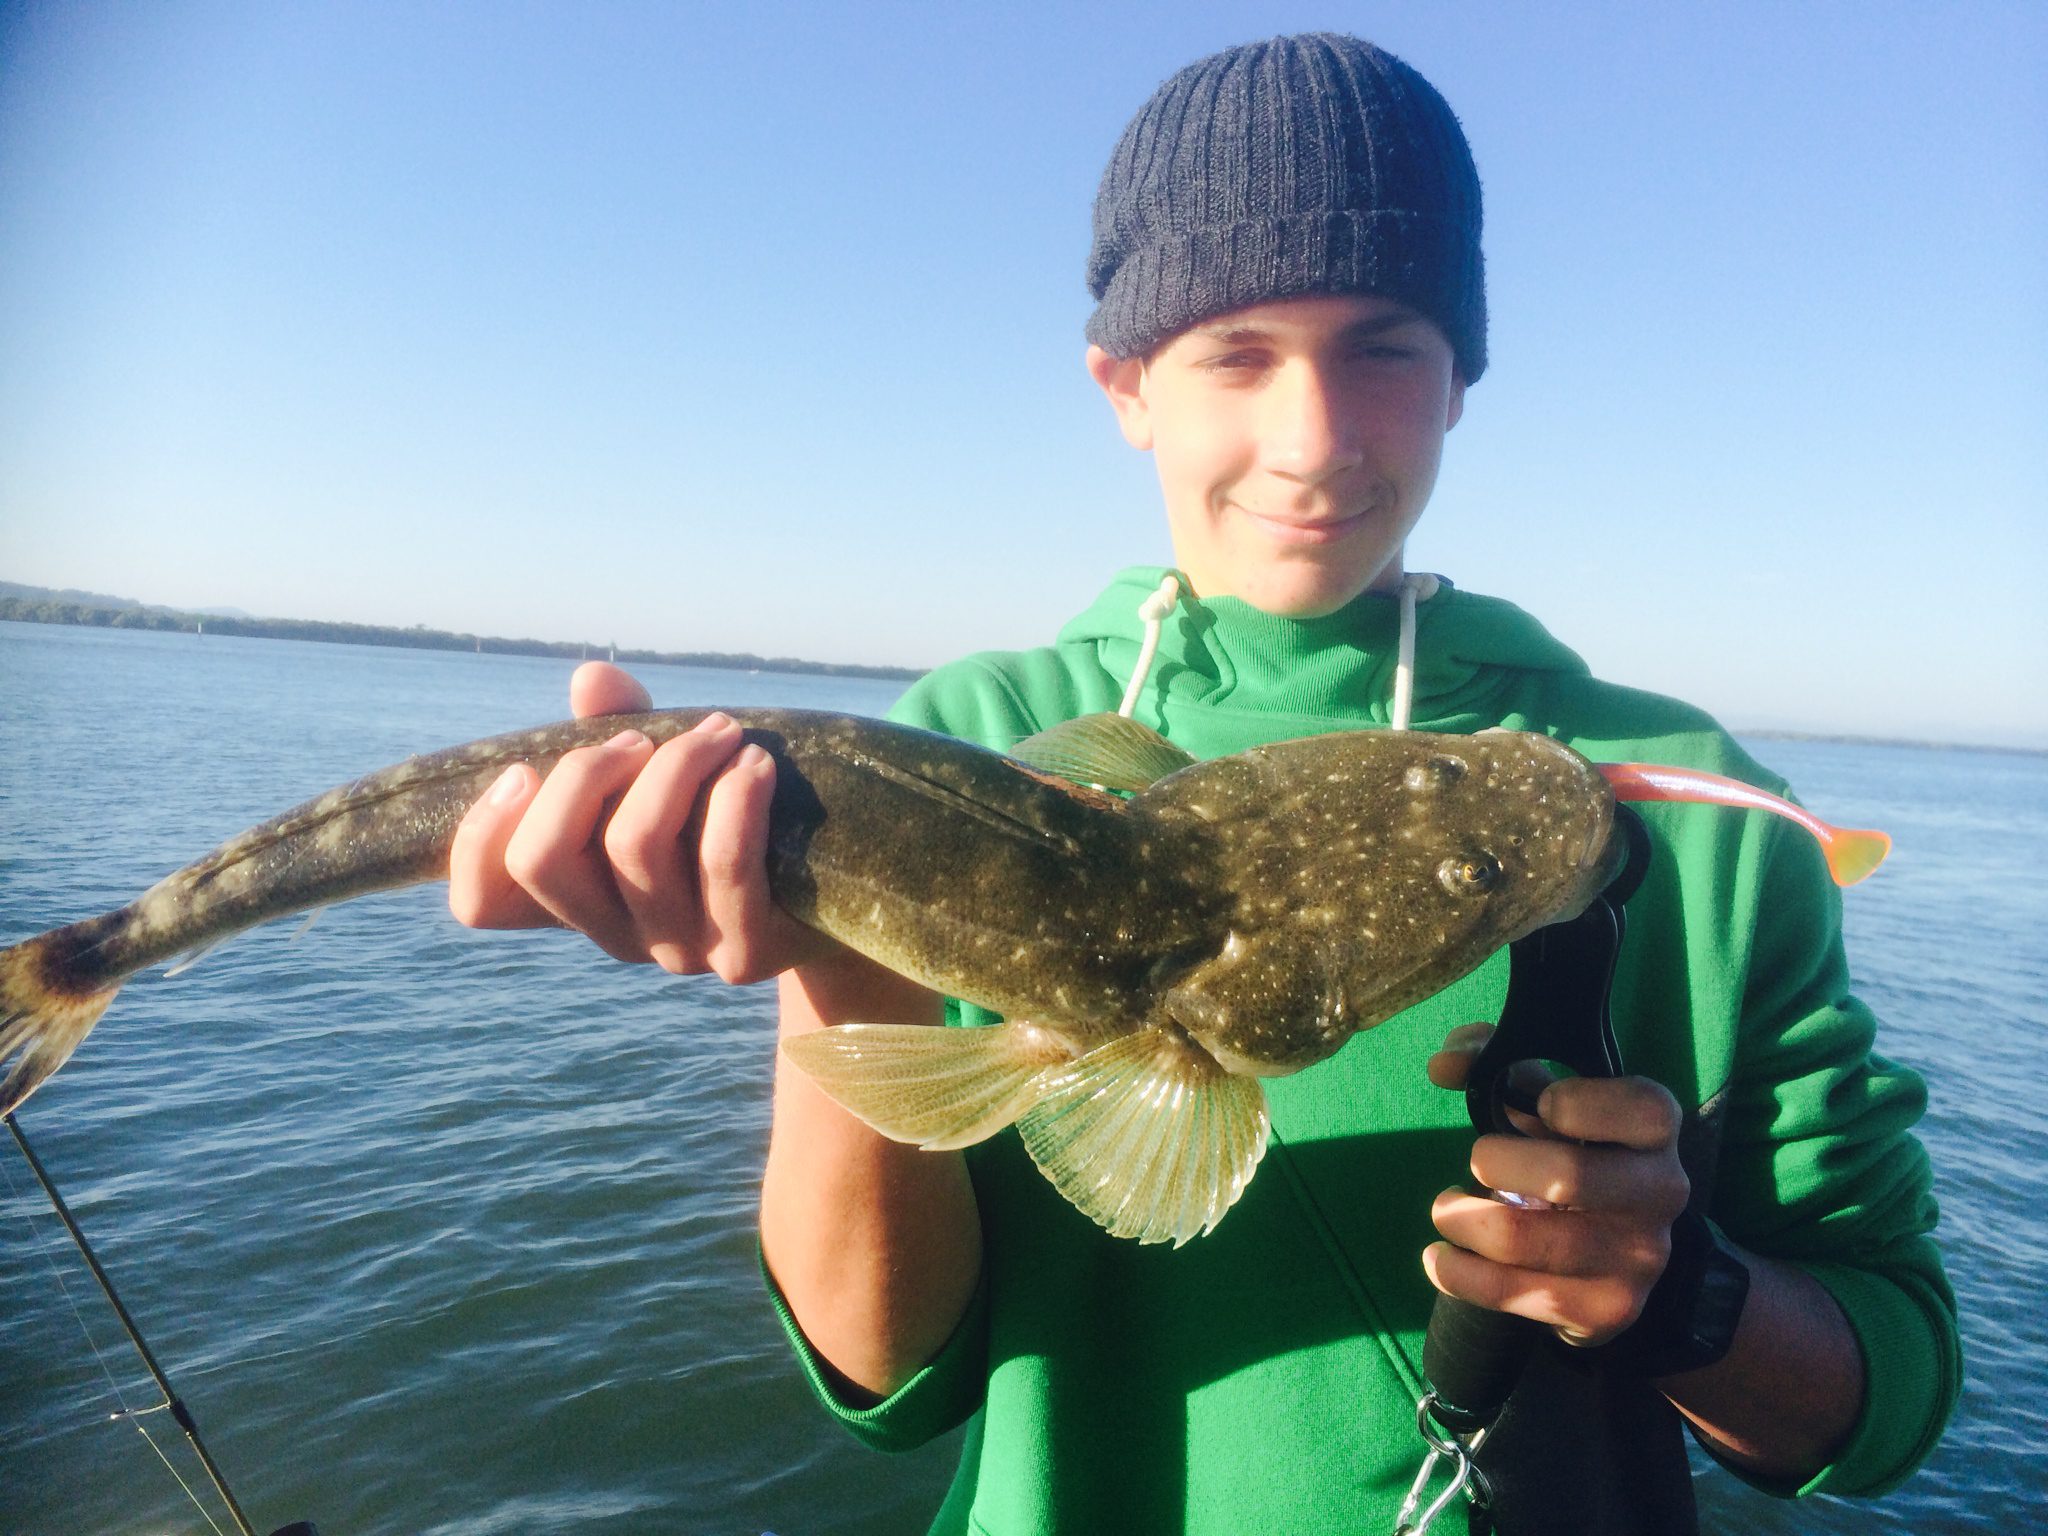 Young blaze call this nice Flathead on a Wilson flat shad on a one quater oz jighead. Casting at a drain at low tide.